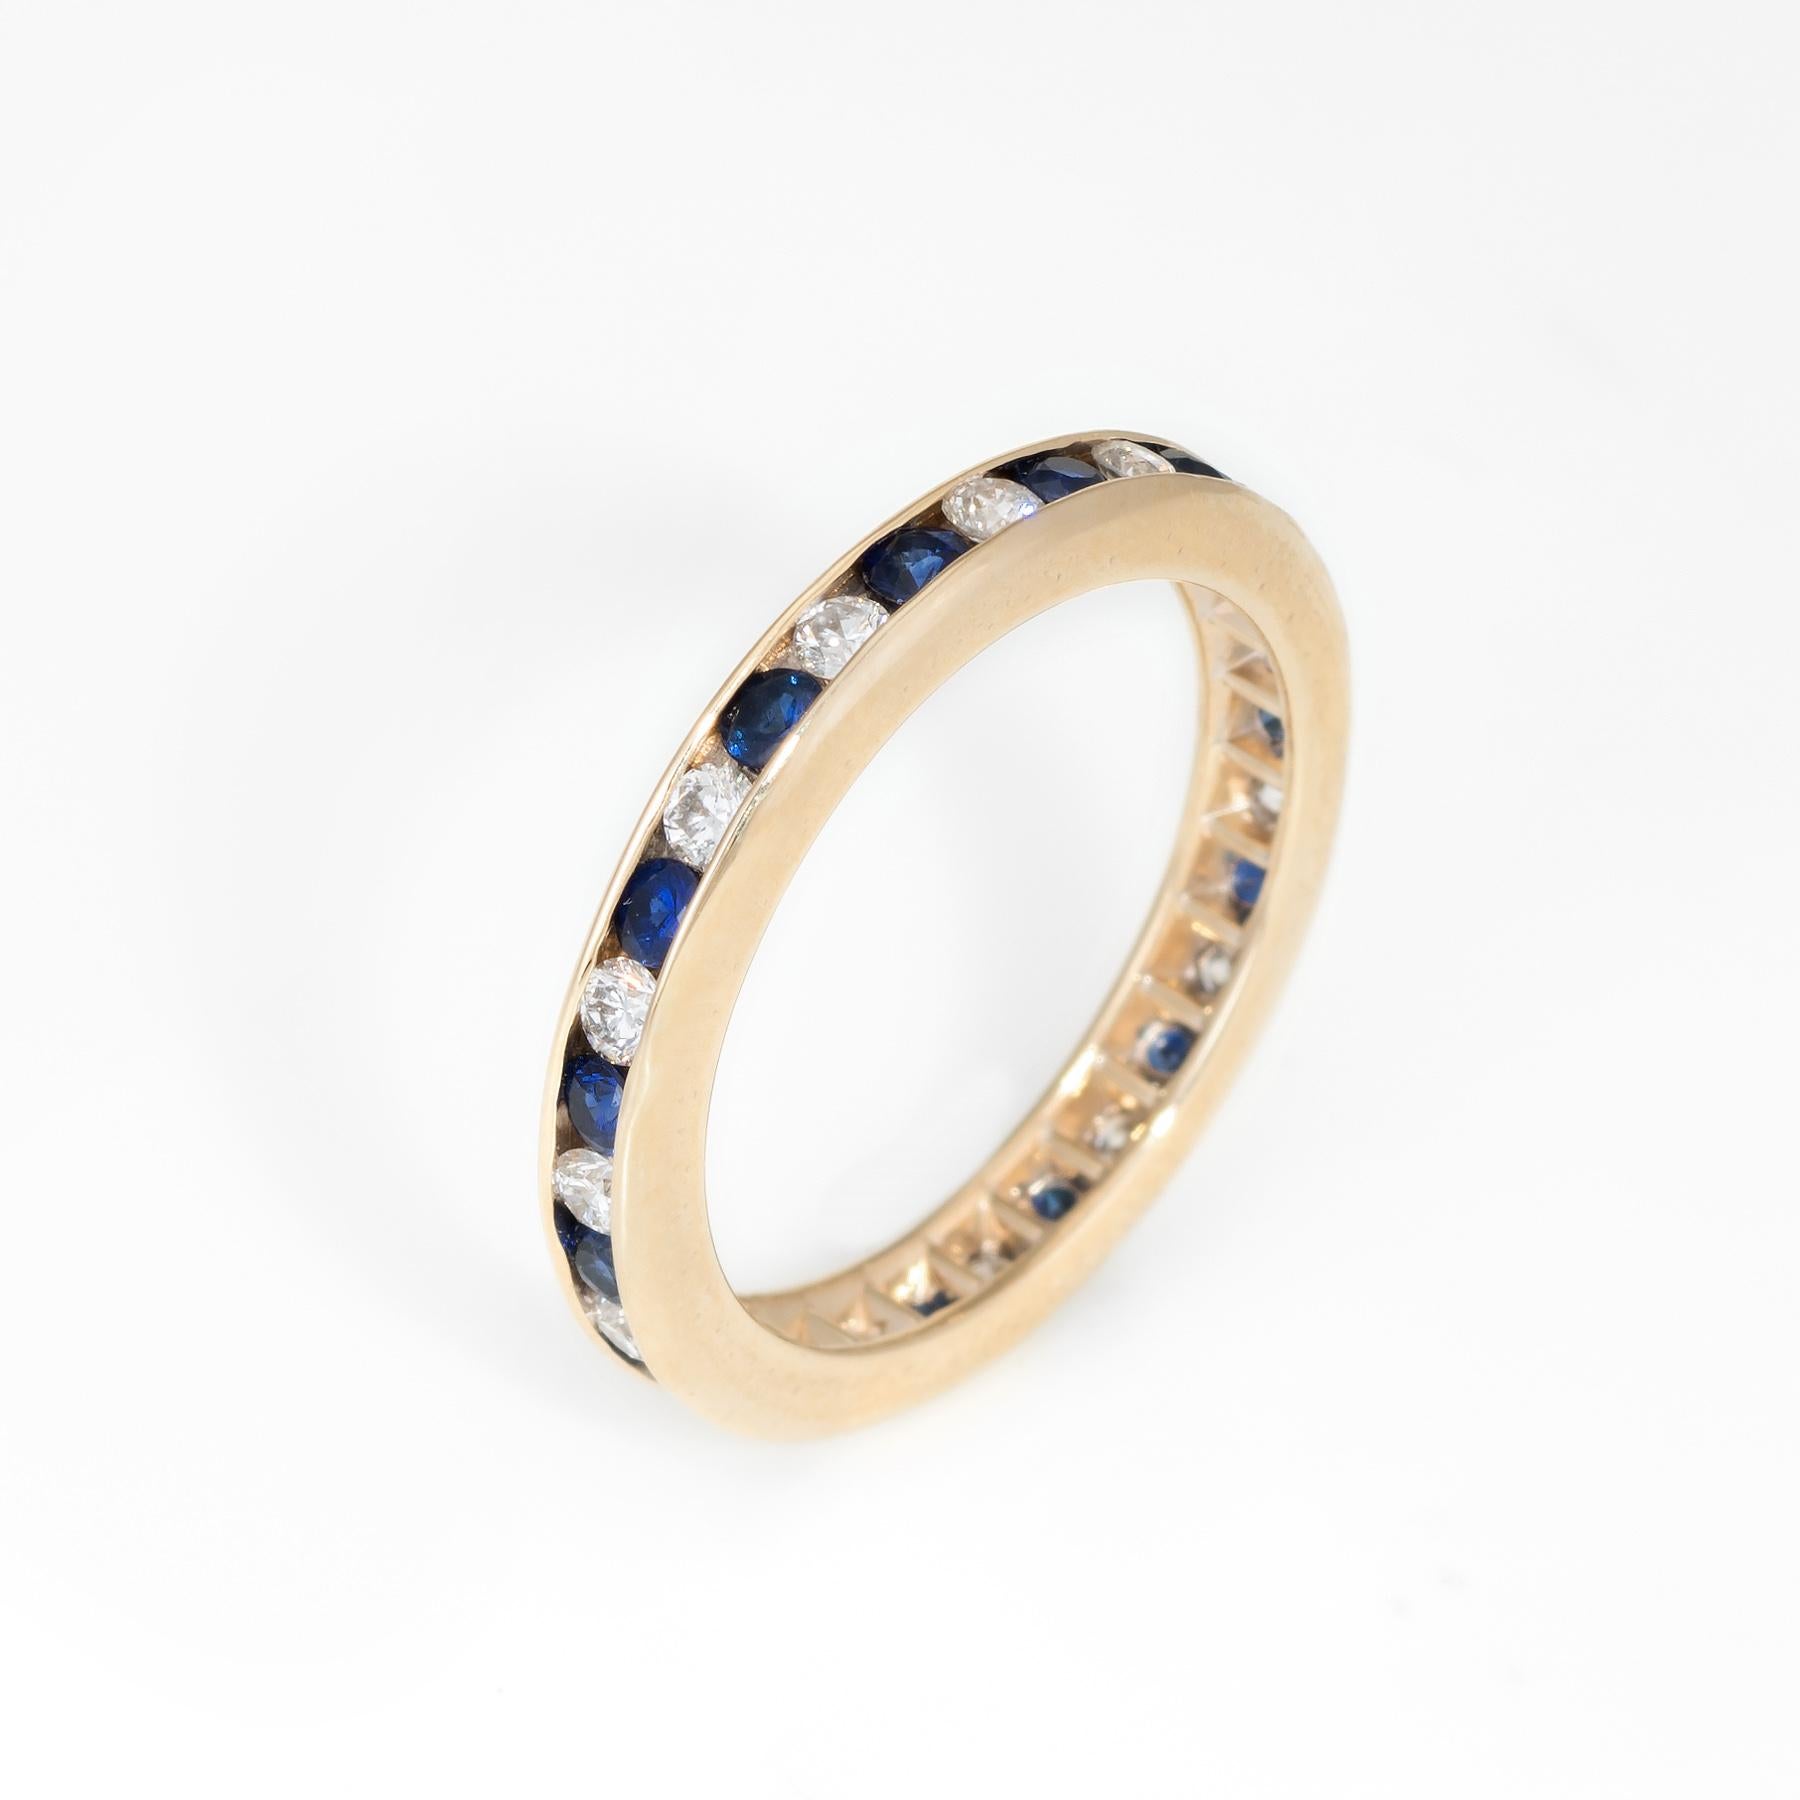 Elegant estate eternity ring, crafted in 14 karat gold. 

15 full cut diamonds total an estimated 0.30 carats (estimated at H-I color and VS2-SI1 clarity), accented with an estimated 0.30 carats of sapphires. 

The ring is in excellent condition.